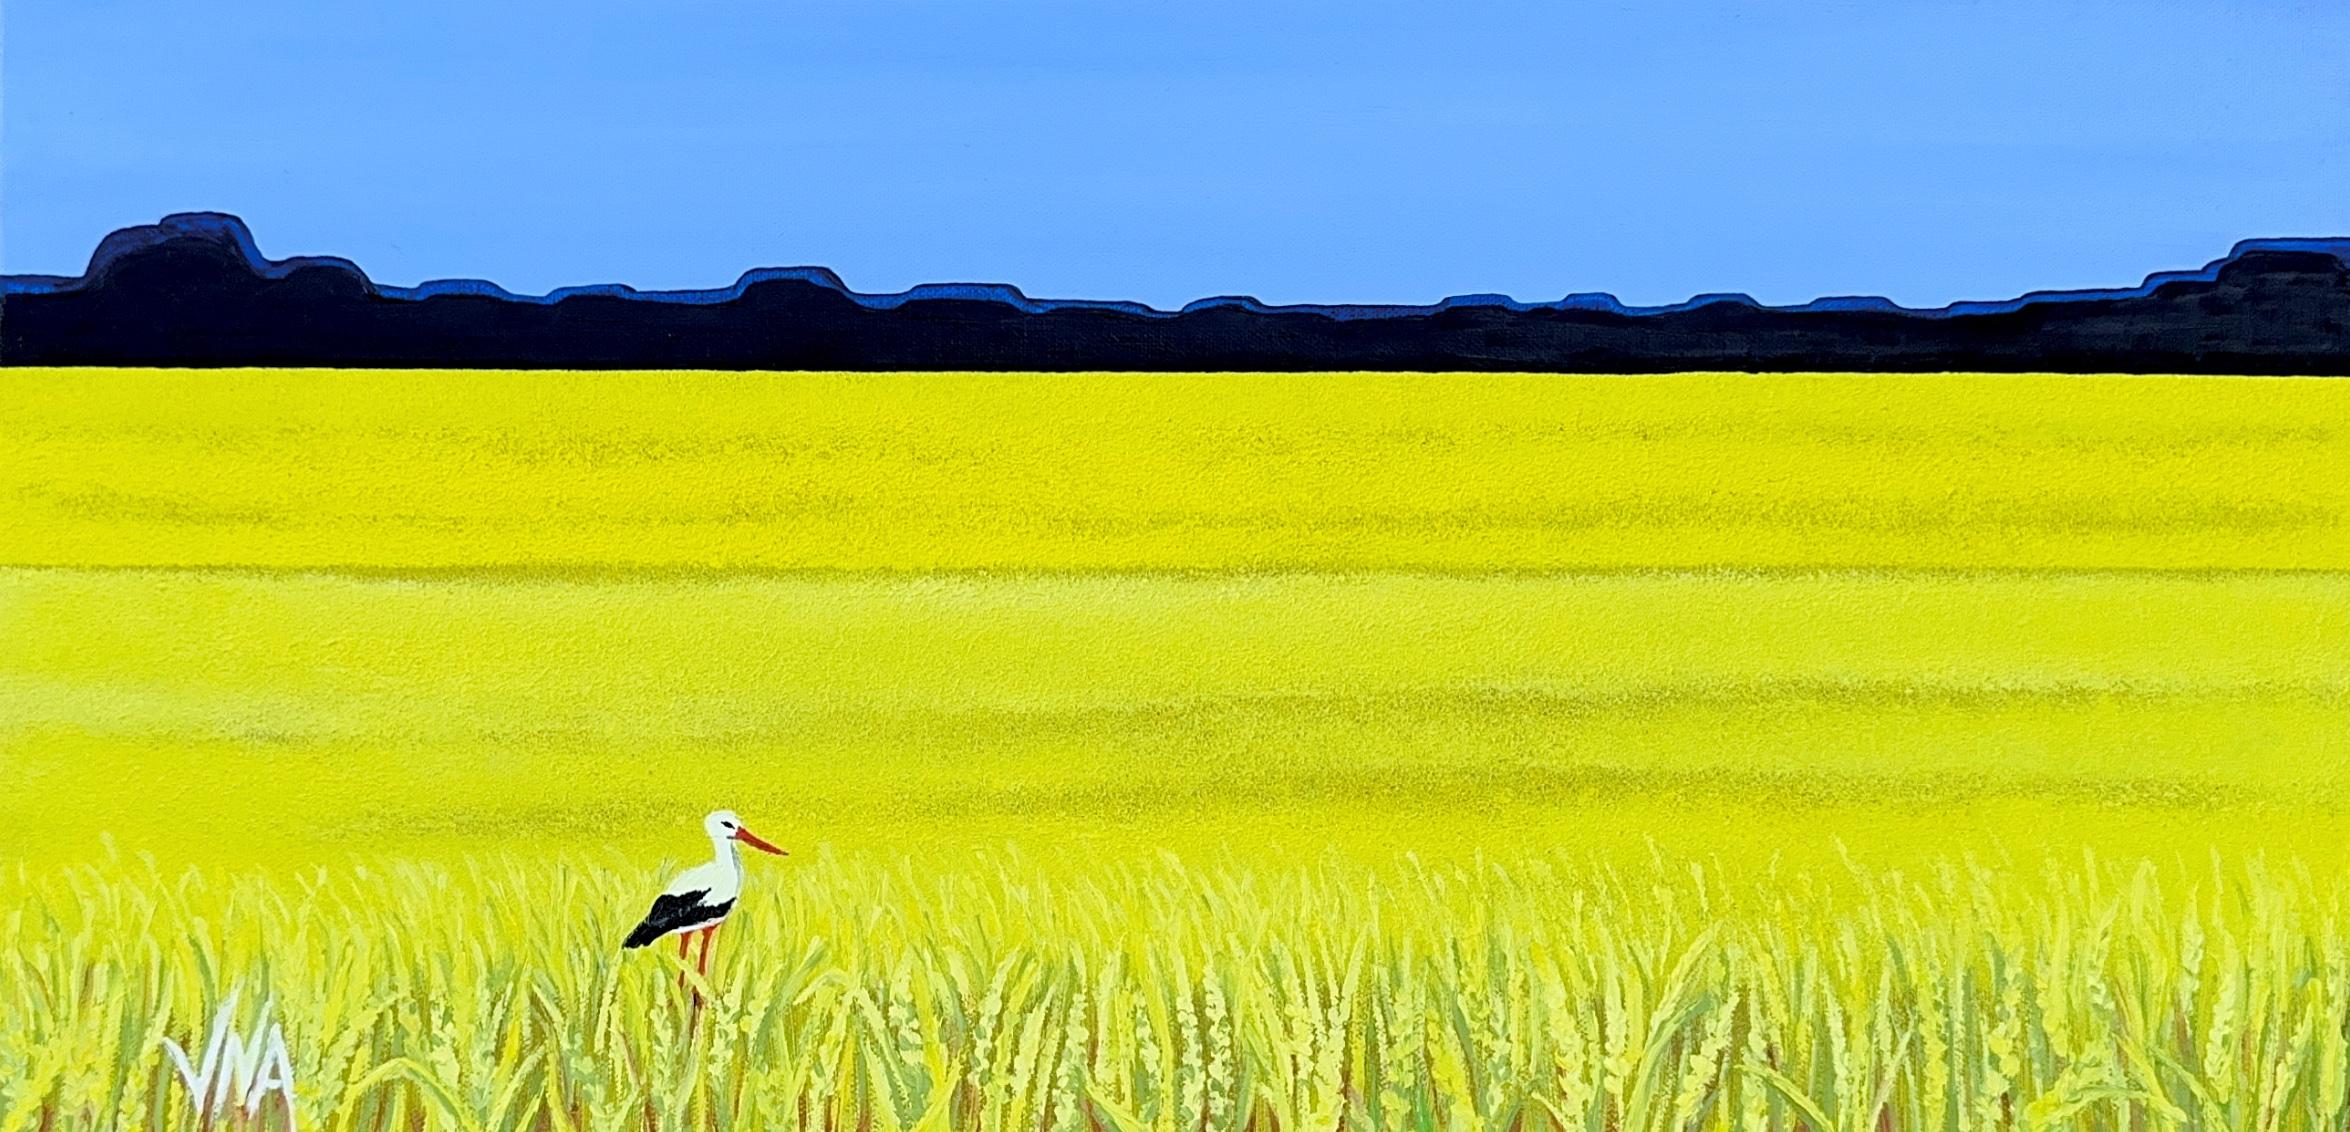 Rapeseed field and stork, Ukraine  by Vokiana - Painting by Unknown